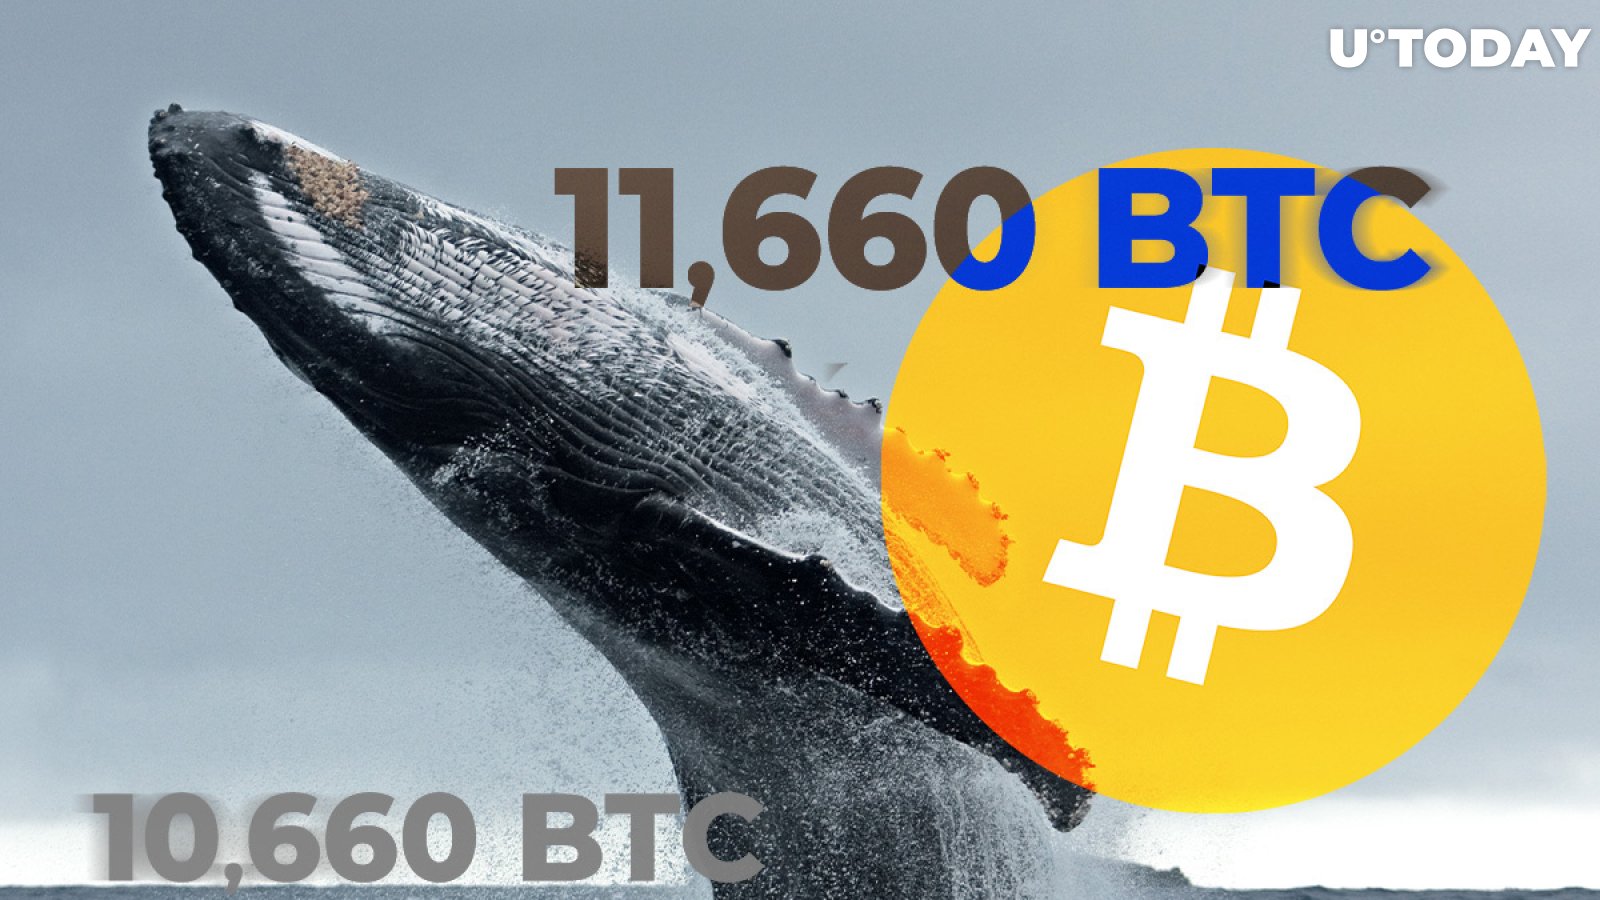 Bitcoin Whale Receives 11,660 BTC and Sends 10,660 BTC to Anonymous Wallet